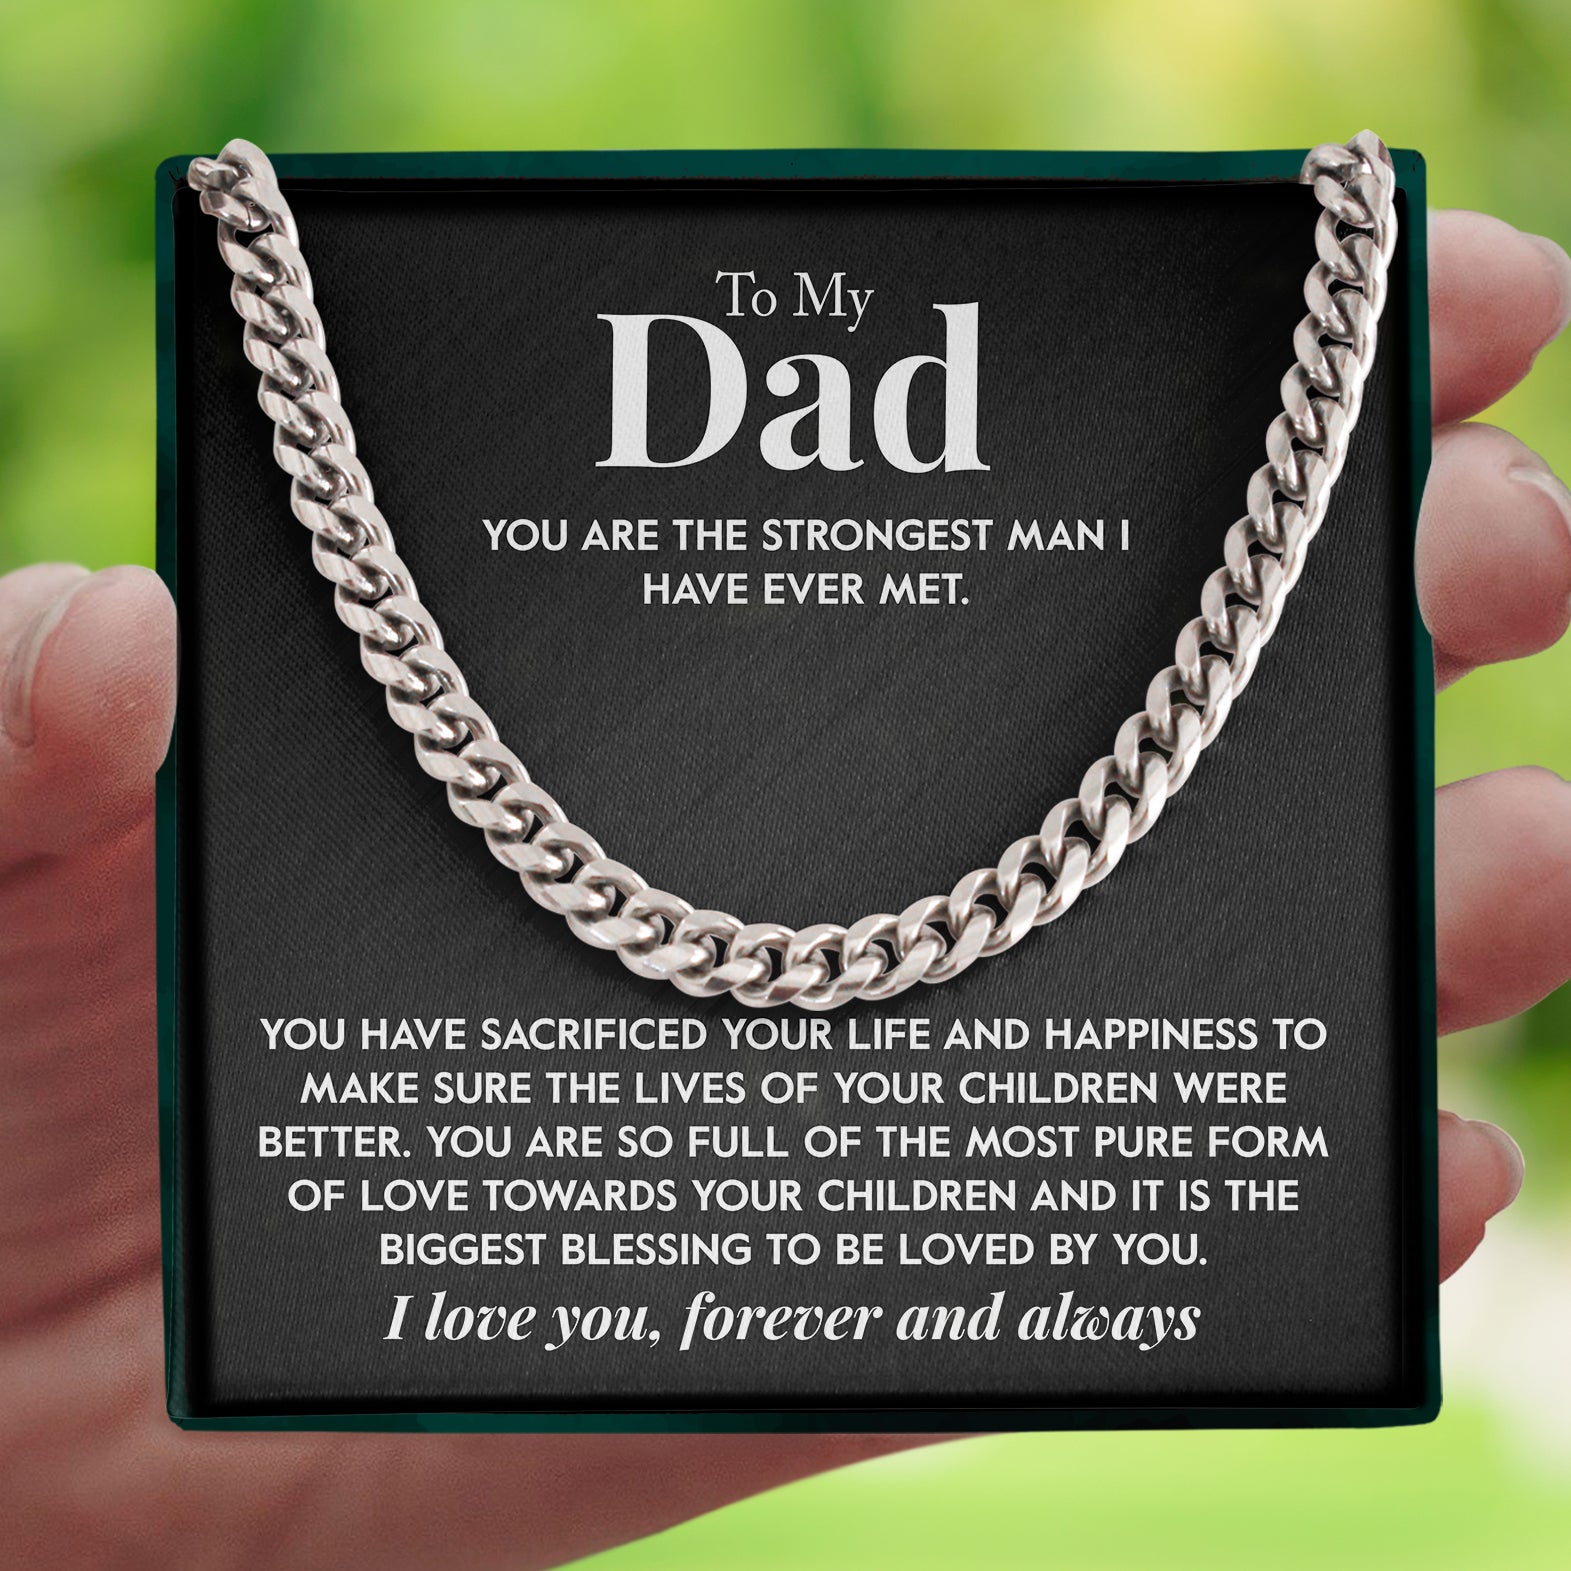 To My Dad | "The Strongest Man" | Cuban Chain Link